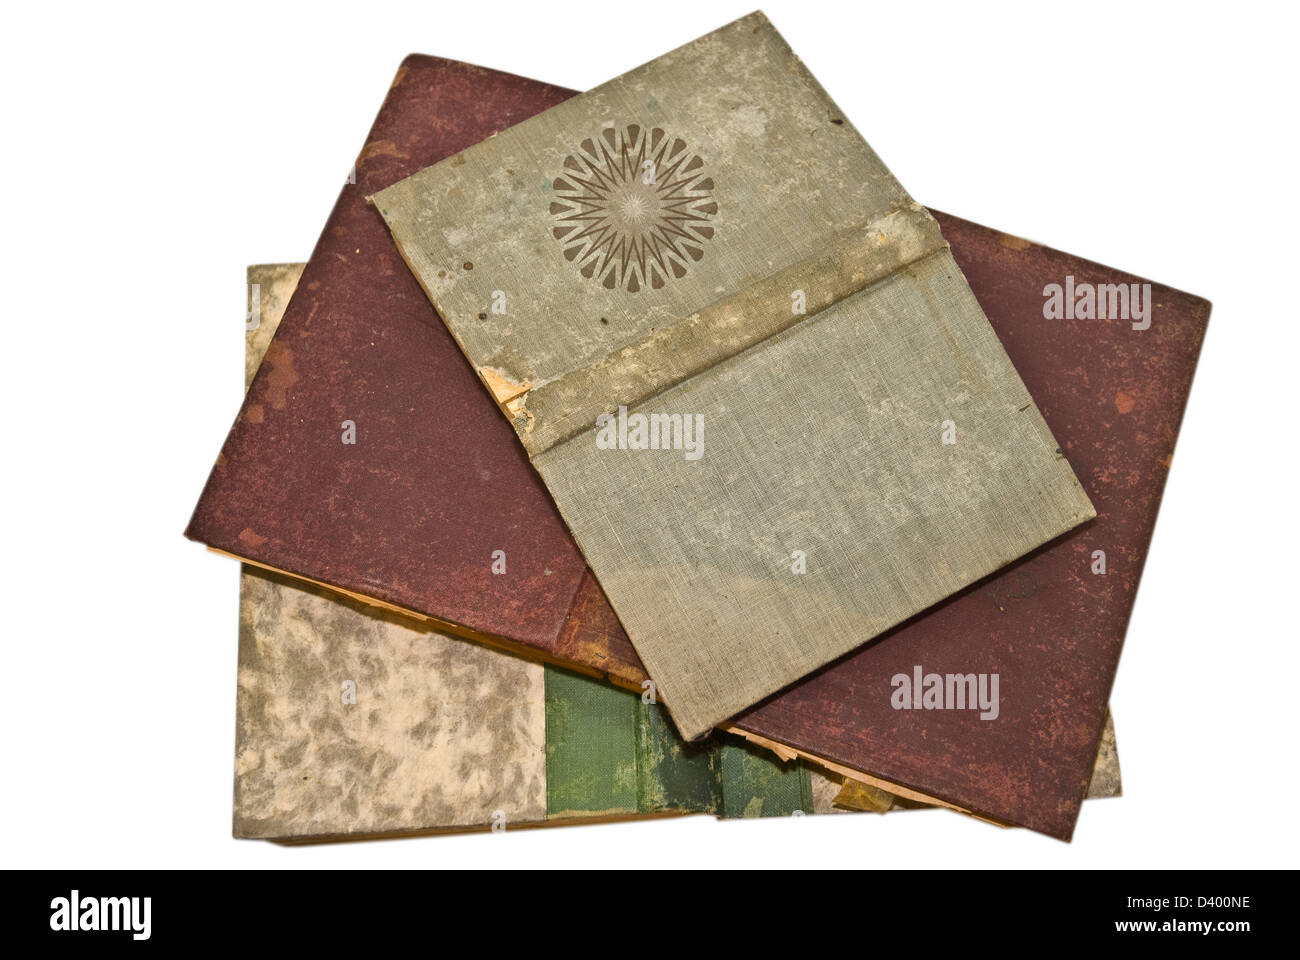 Three old books opened face down showing the front and back covers. Stock Photo